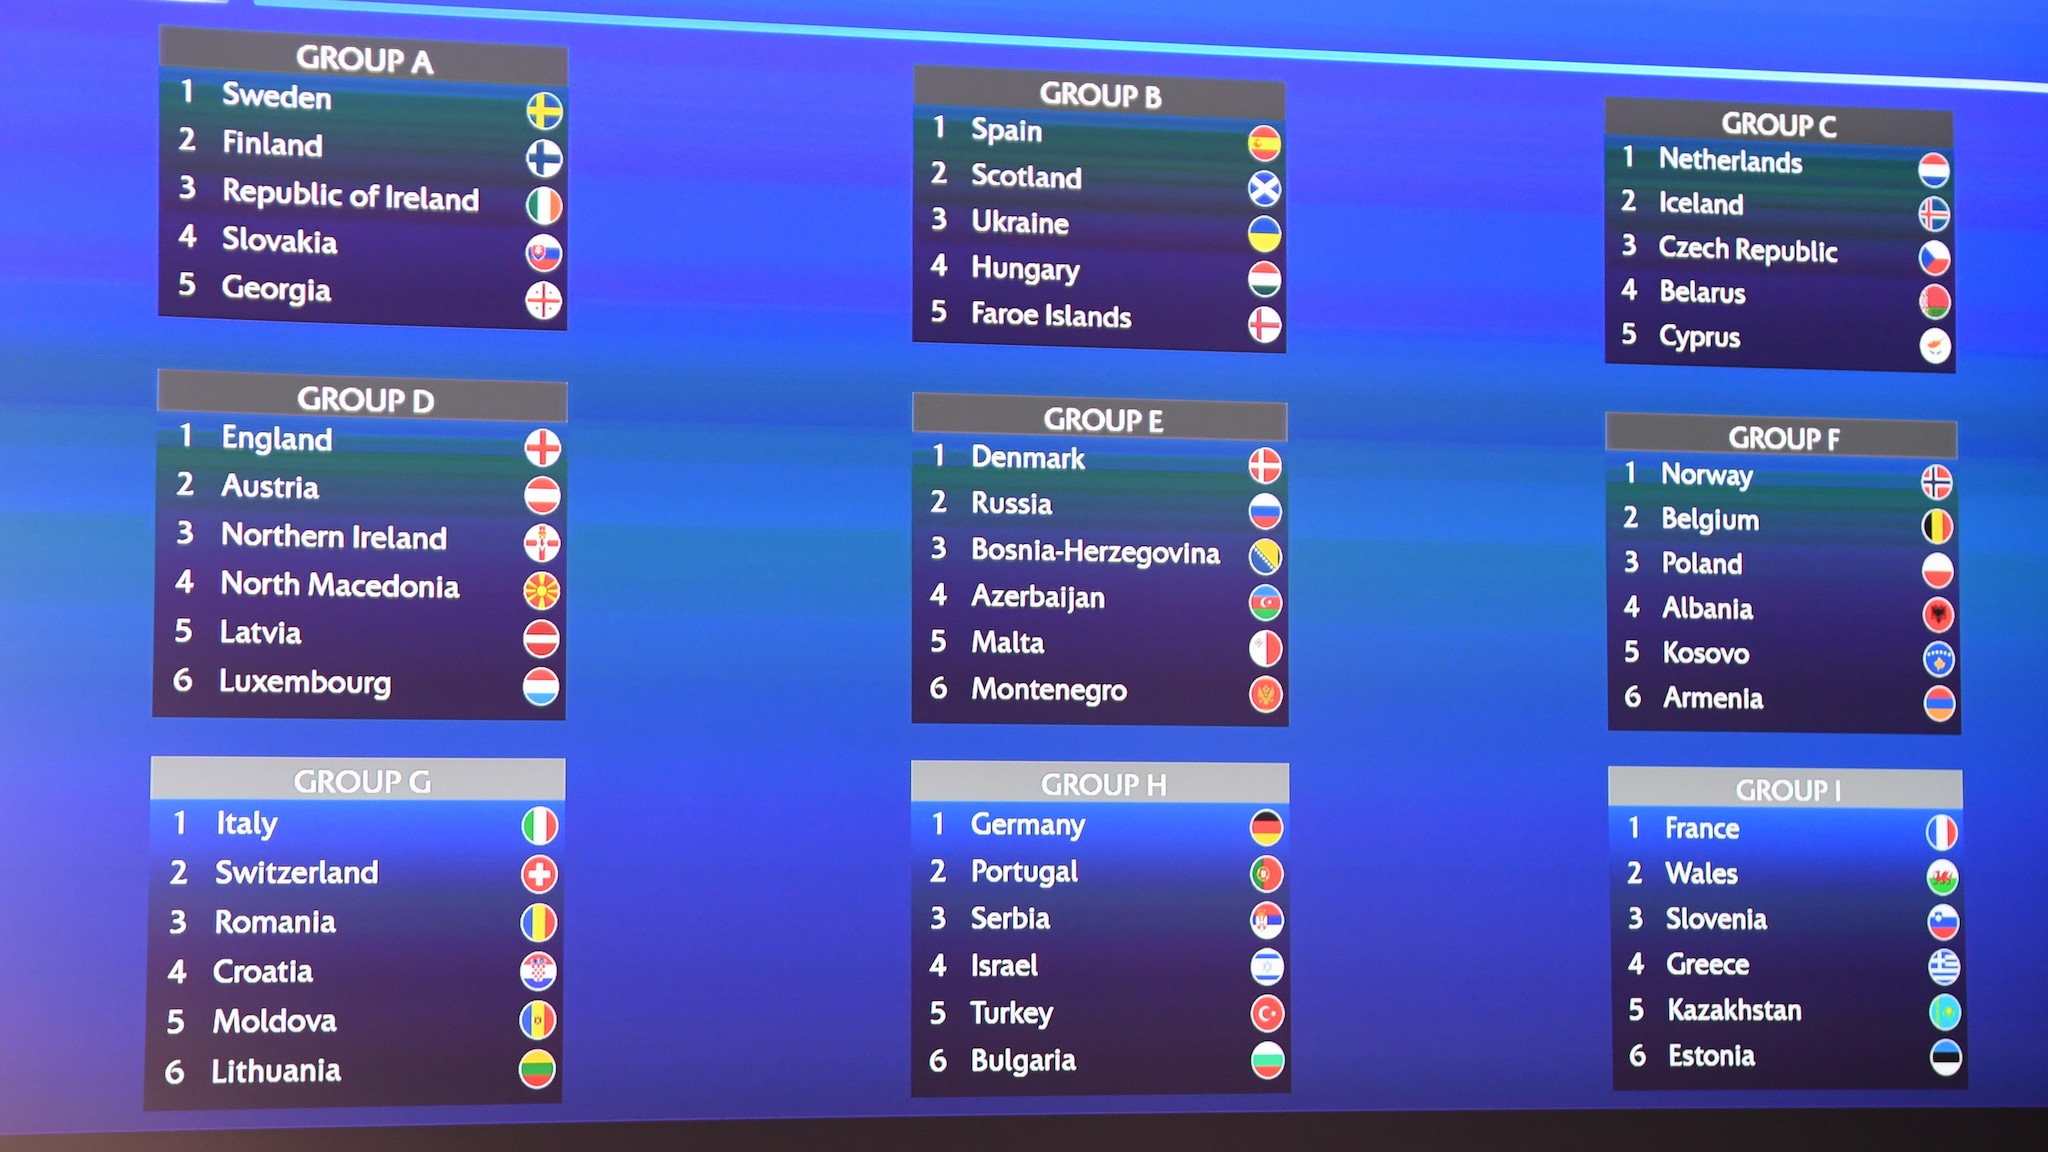 Women's WC 2023: Preliminary round groups drawed!